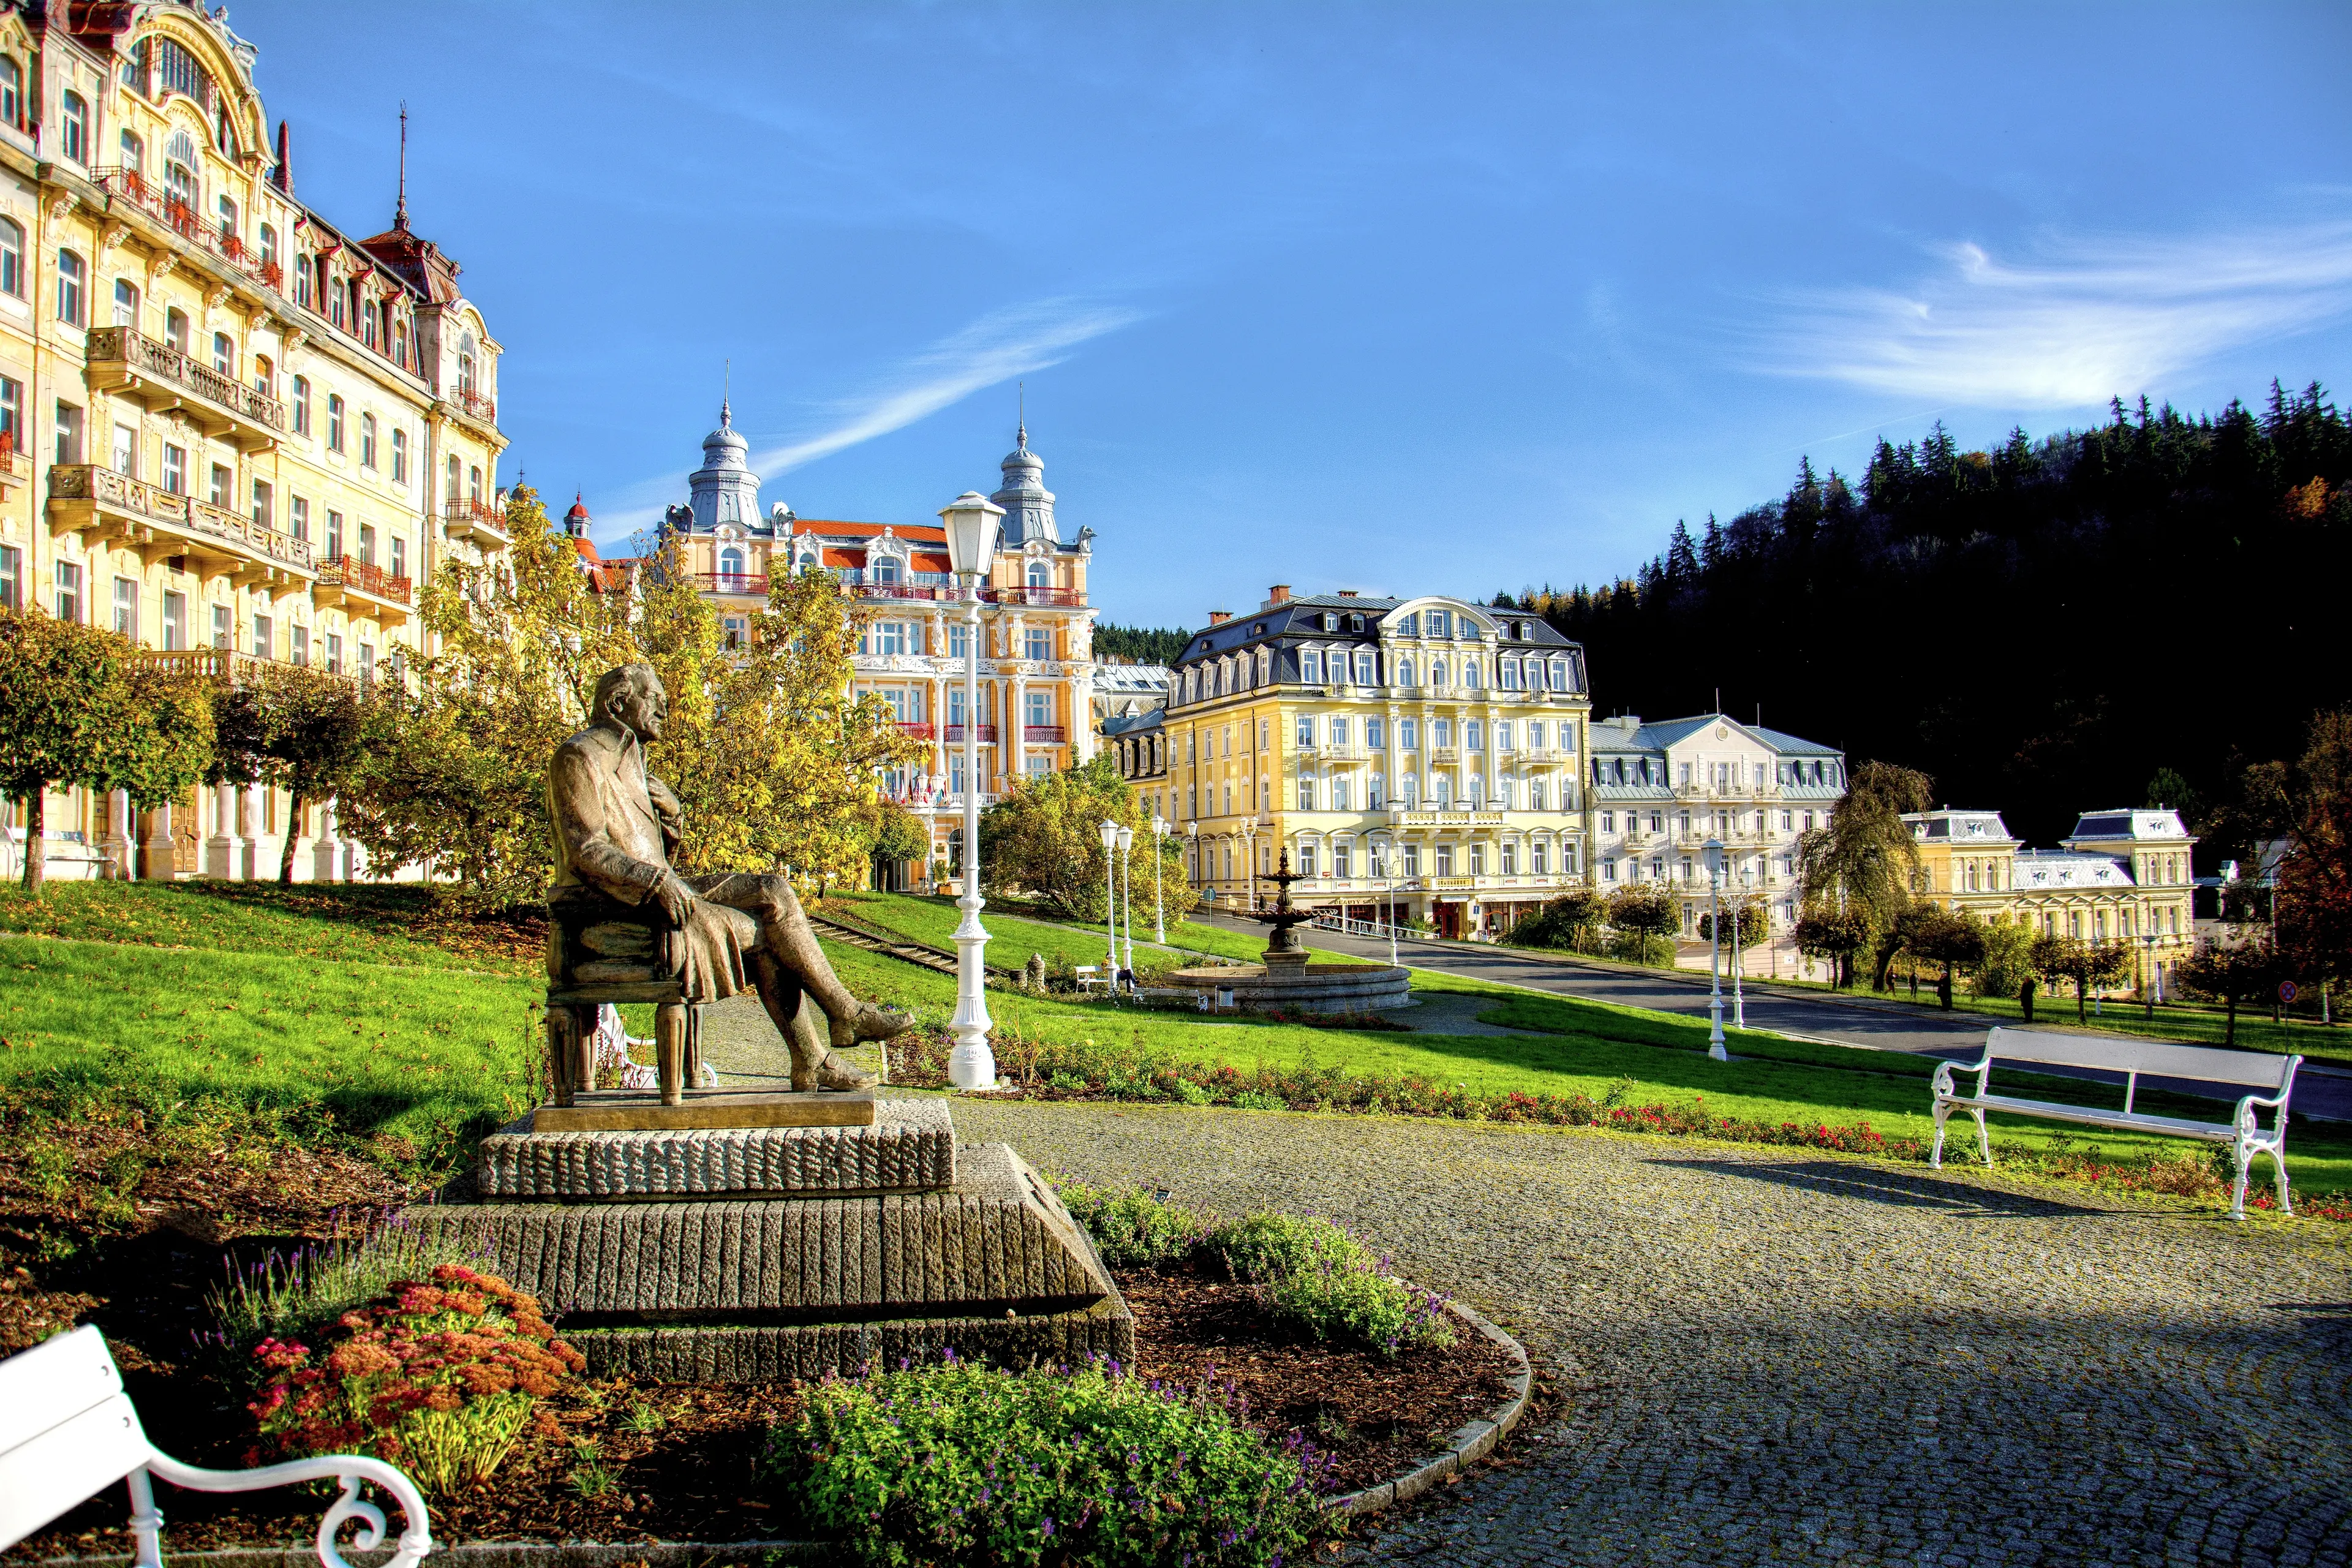 Goethe square with statue, hotel buildings and fountain in the spa park of the town Marianske Lazne (Marienbad)